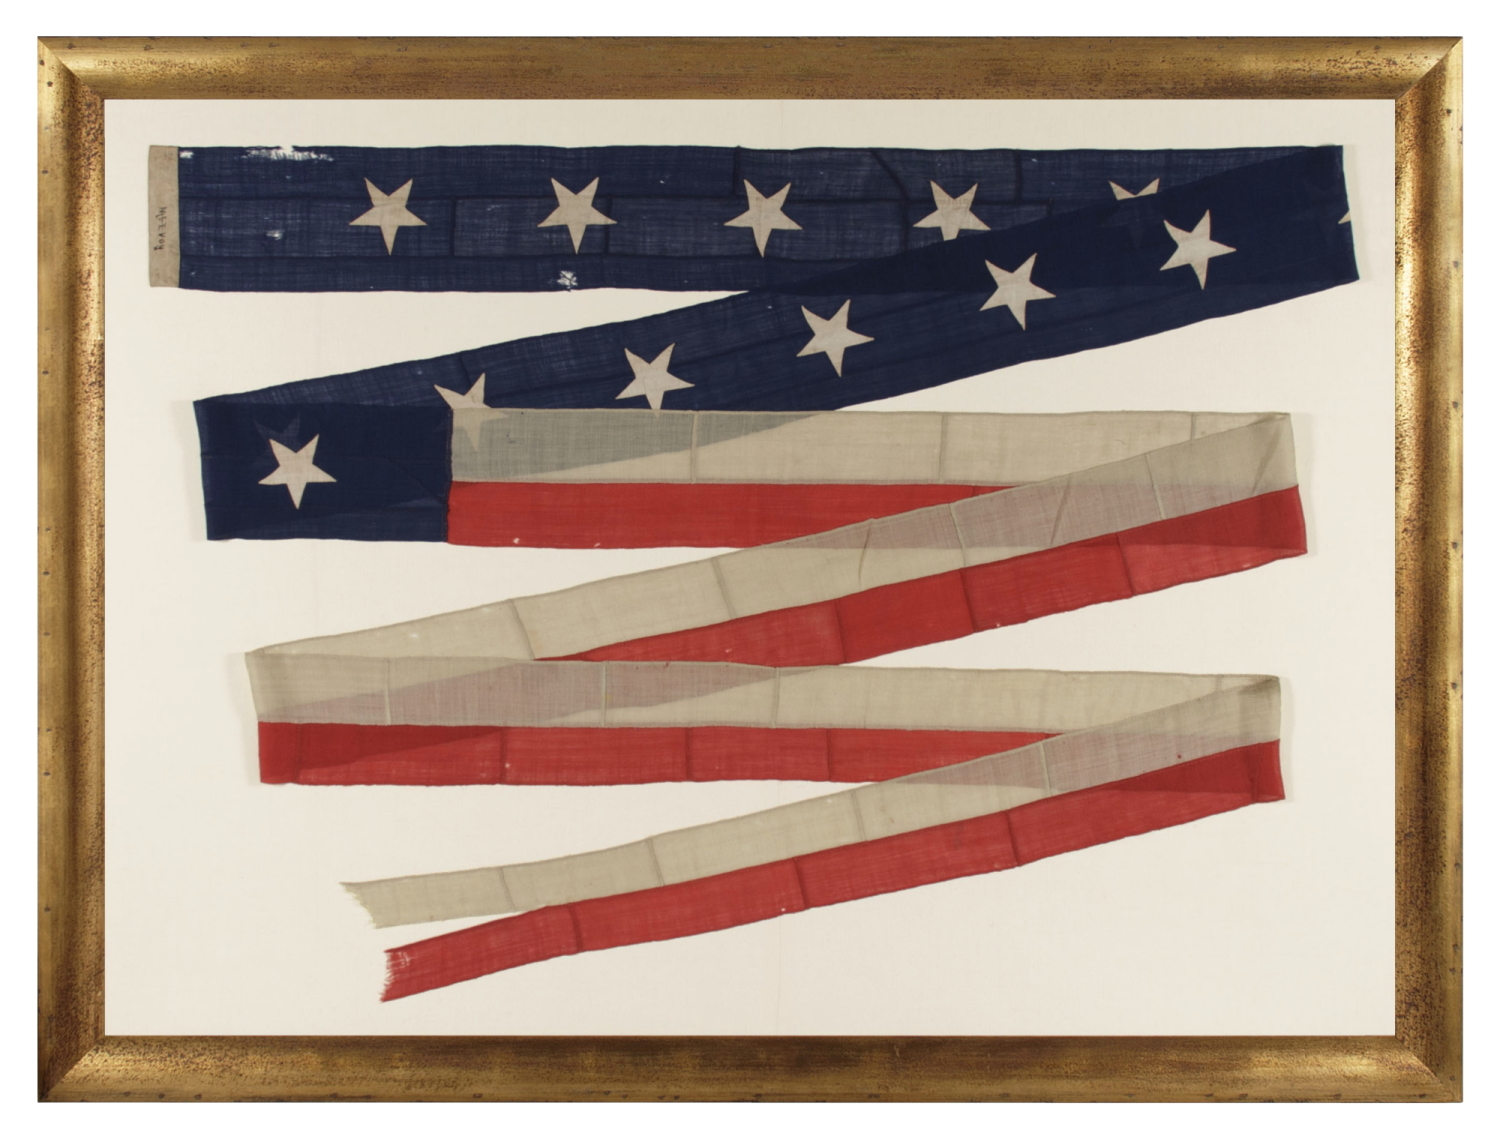 U.S. NAVY COMMISSIONING PENNANT OF THE CIVIL WAR PERIOD (1861-1865), WITH 13 STARS, ENTIRELY HAND SEWN, AN EXCEPTIONAL SURVIVOR